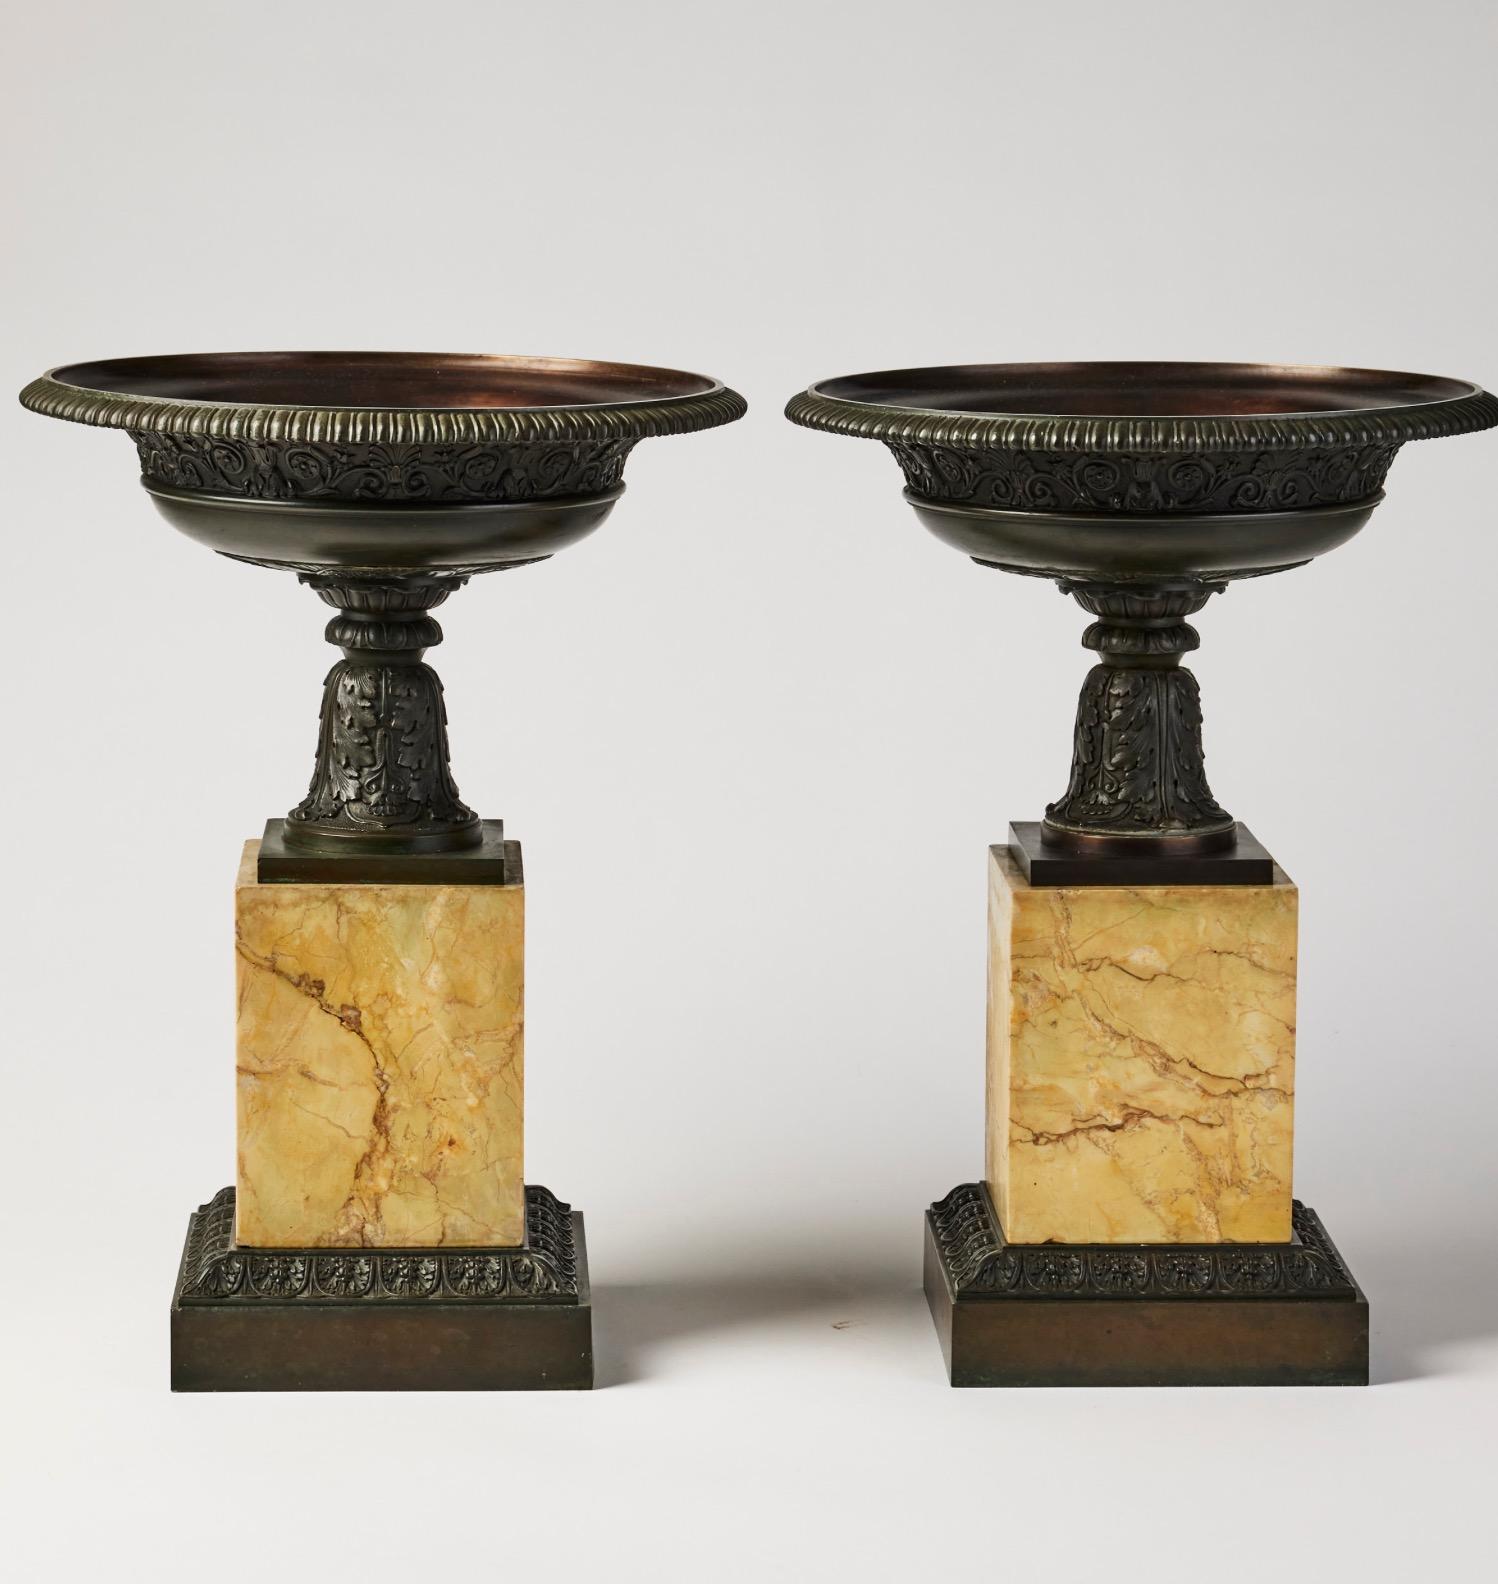 Patinated Pair of 19th Century Italian Grand Tour Tazzas on Sienna Marble Bases